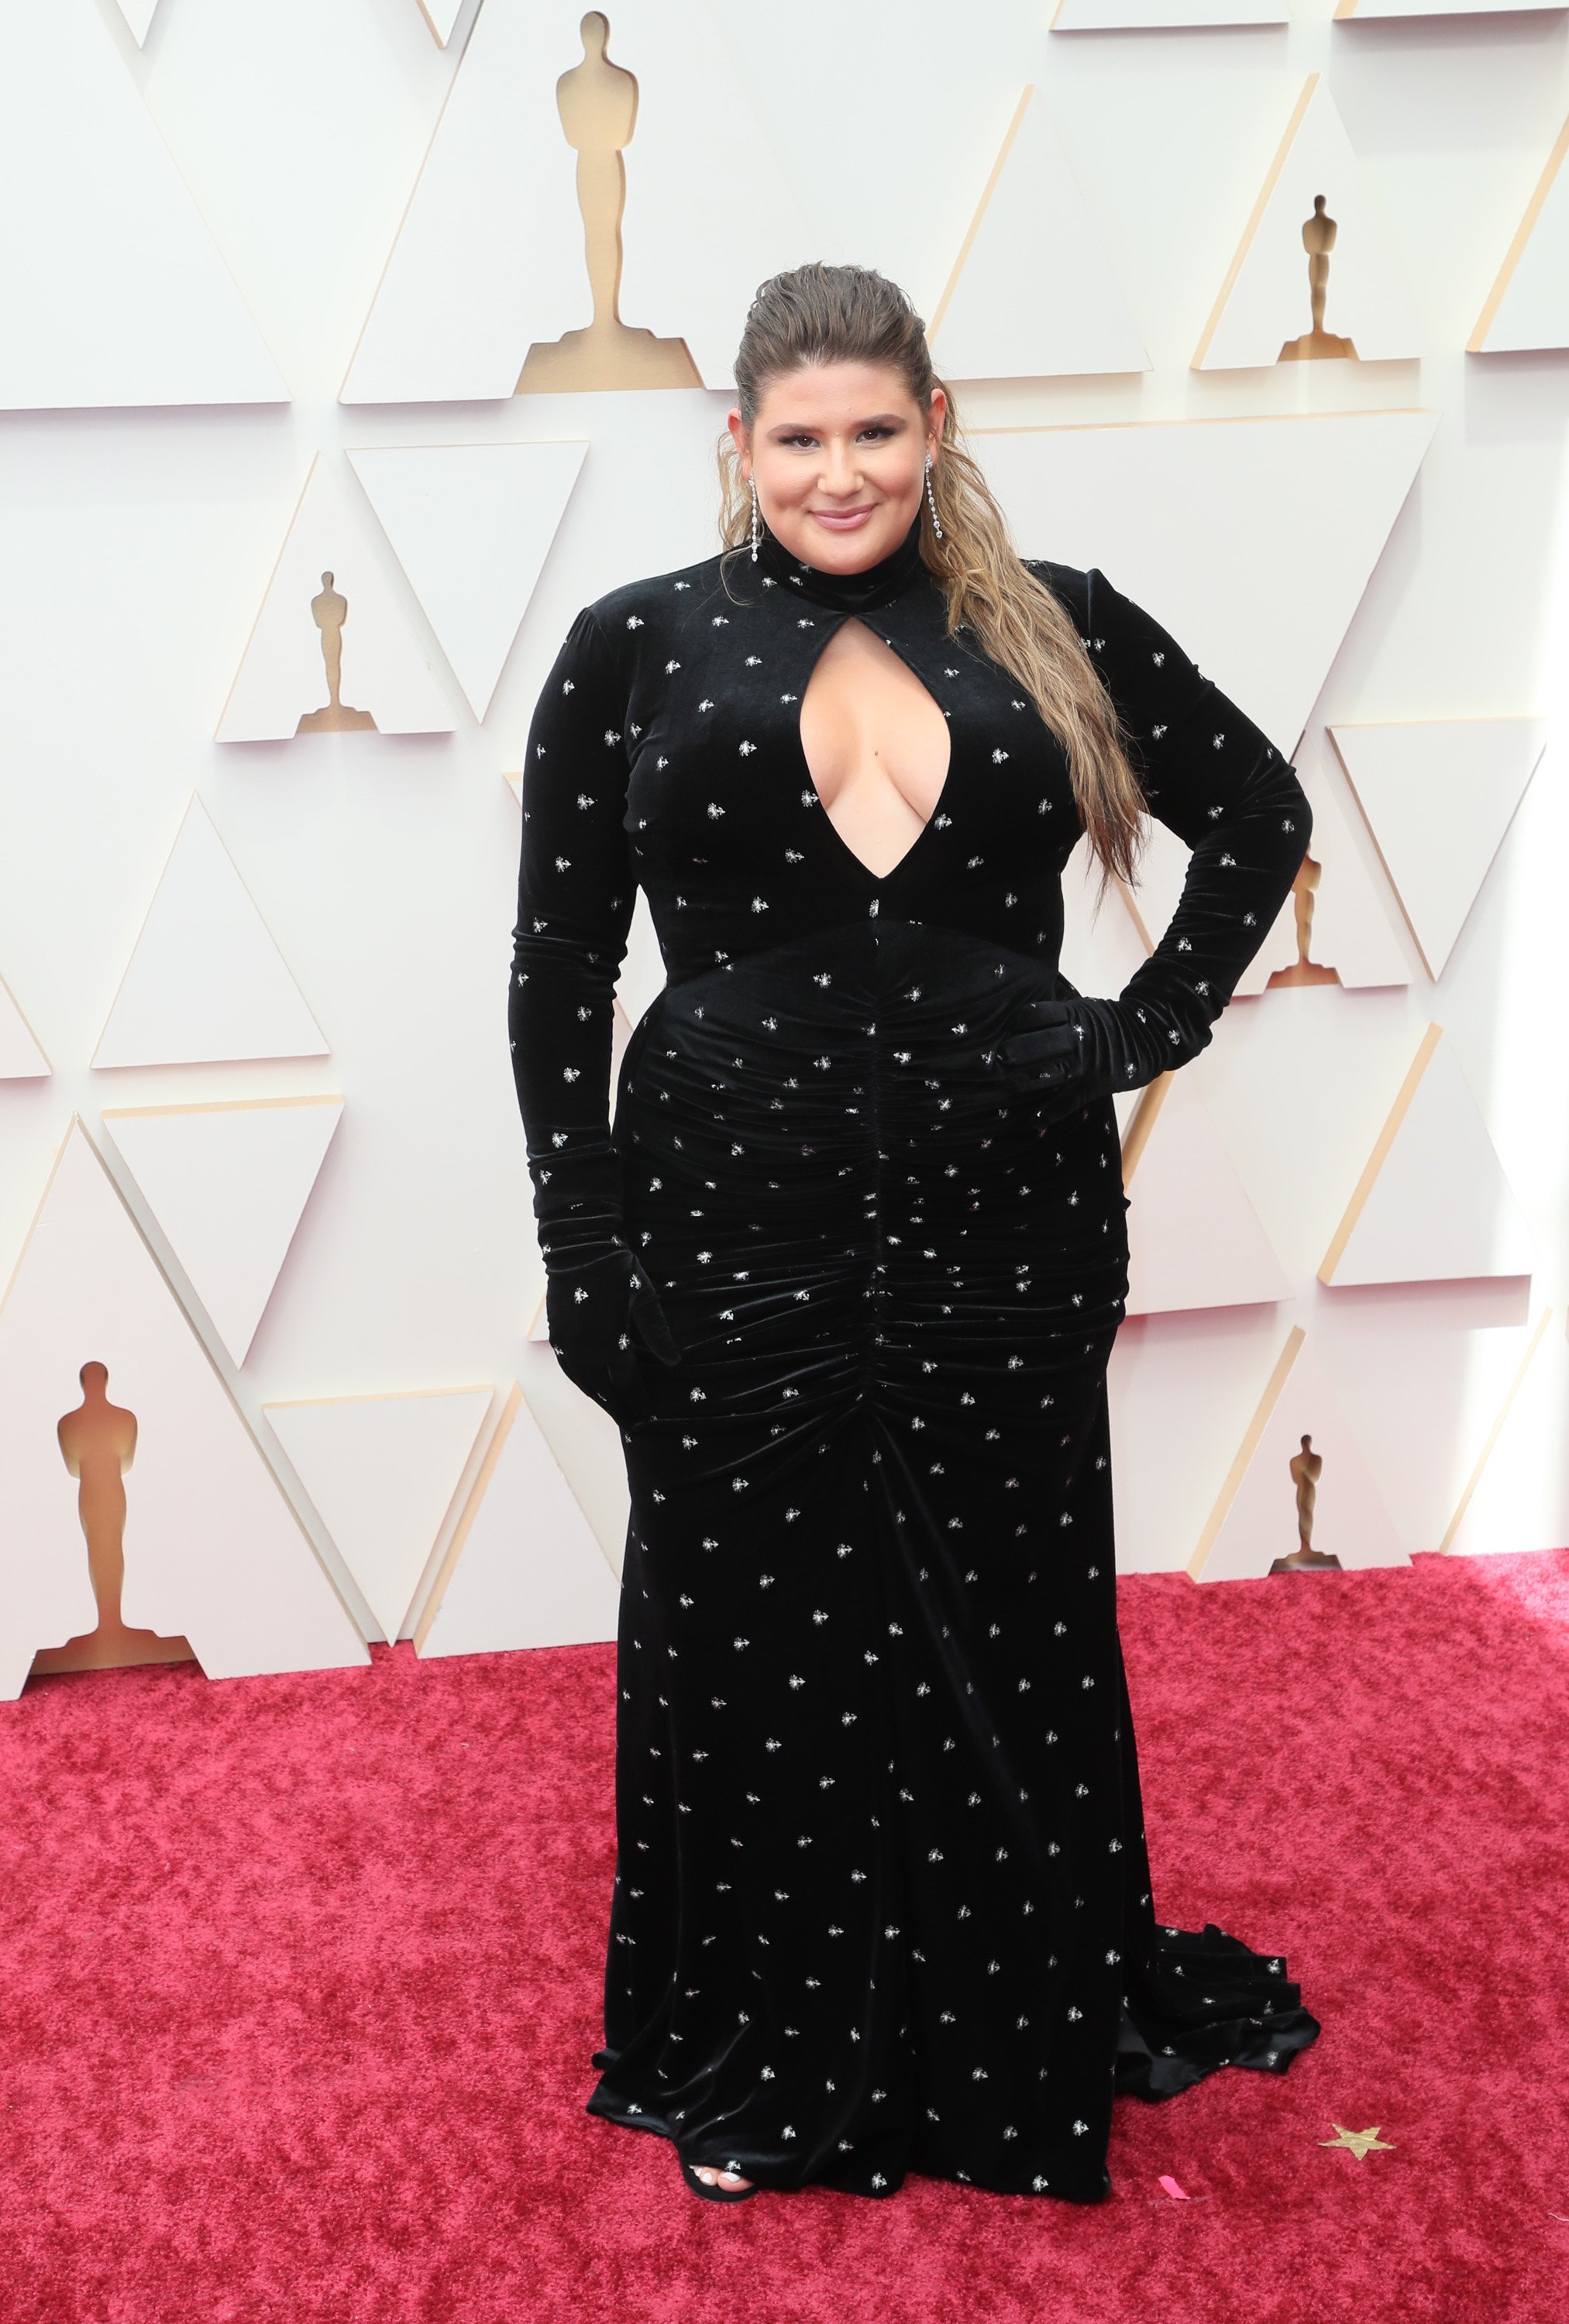  Remi Bader attends the 94th Annual Academy Awards at Hollywood and Highland on March 27, 2022 in Hollywood, California. | Source: Getty Images